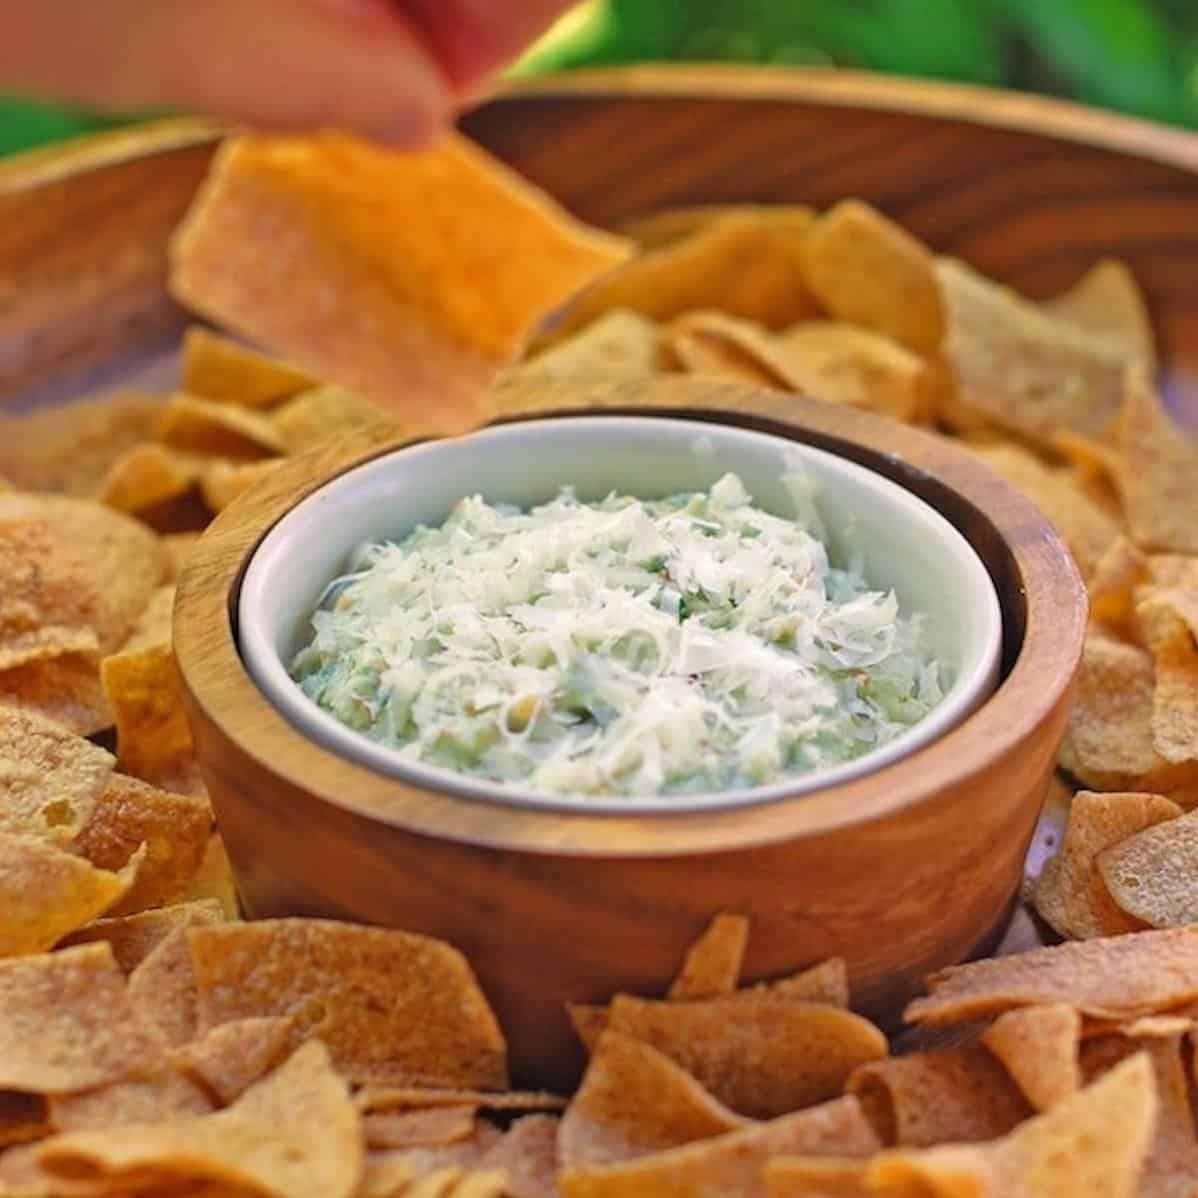  Garlic lovers, this one's for you! You won't be disappointed with this dip.